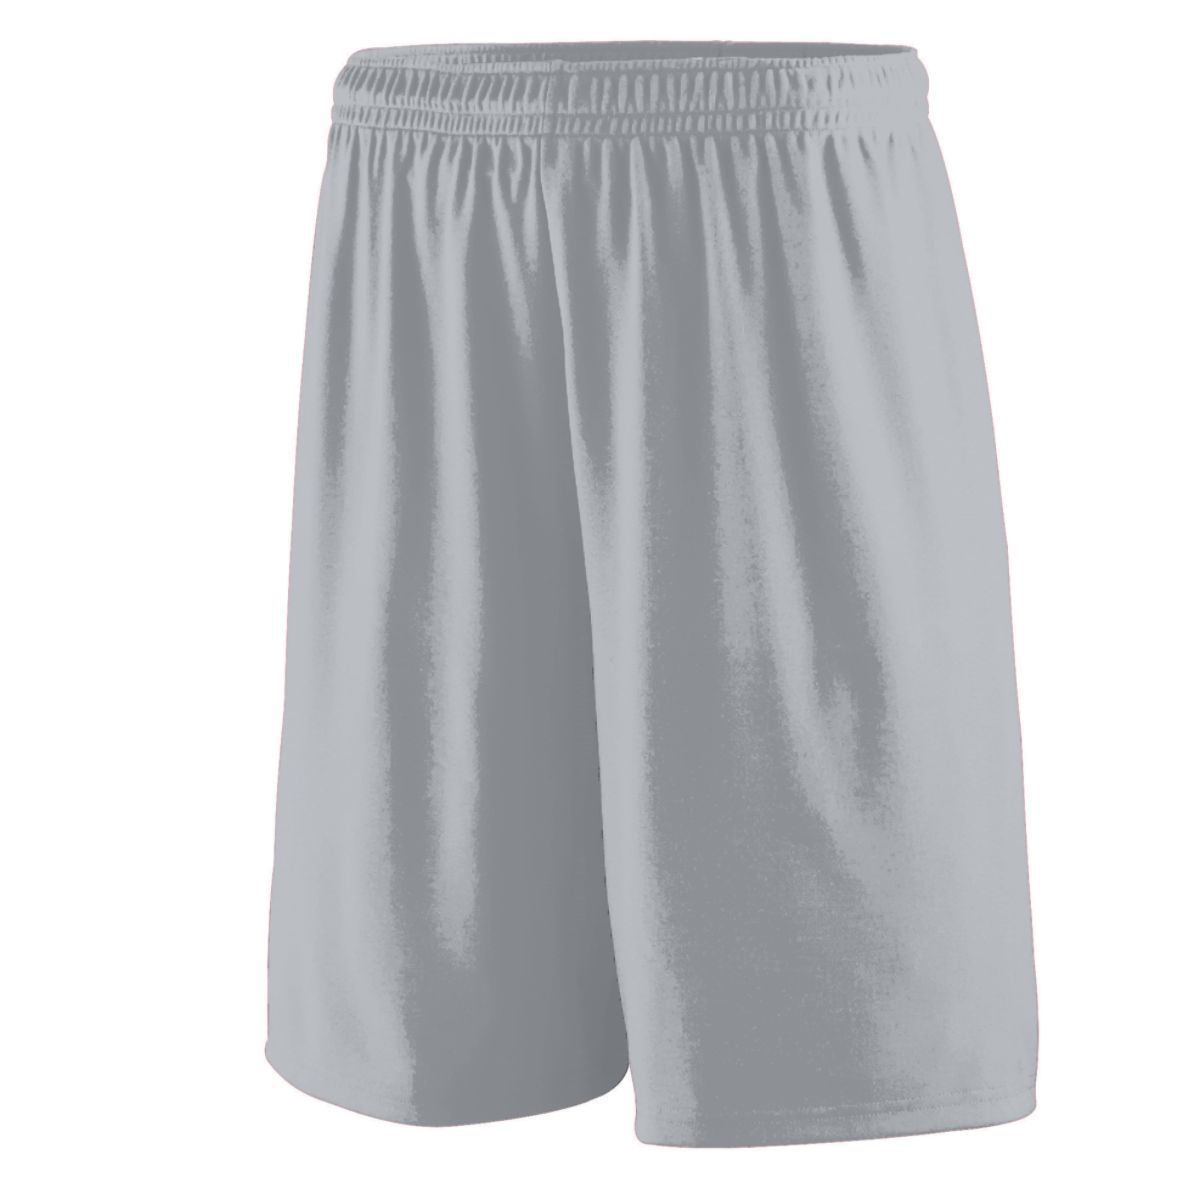 Augusta Sportswear Training Shorts in Silver Grey  -Part of the Adult, Adult-Shorts, Augusta-Products product lines at KanaleyCreations.com